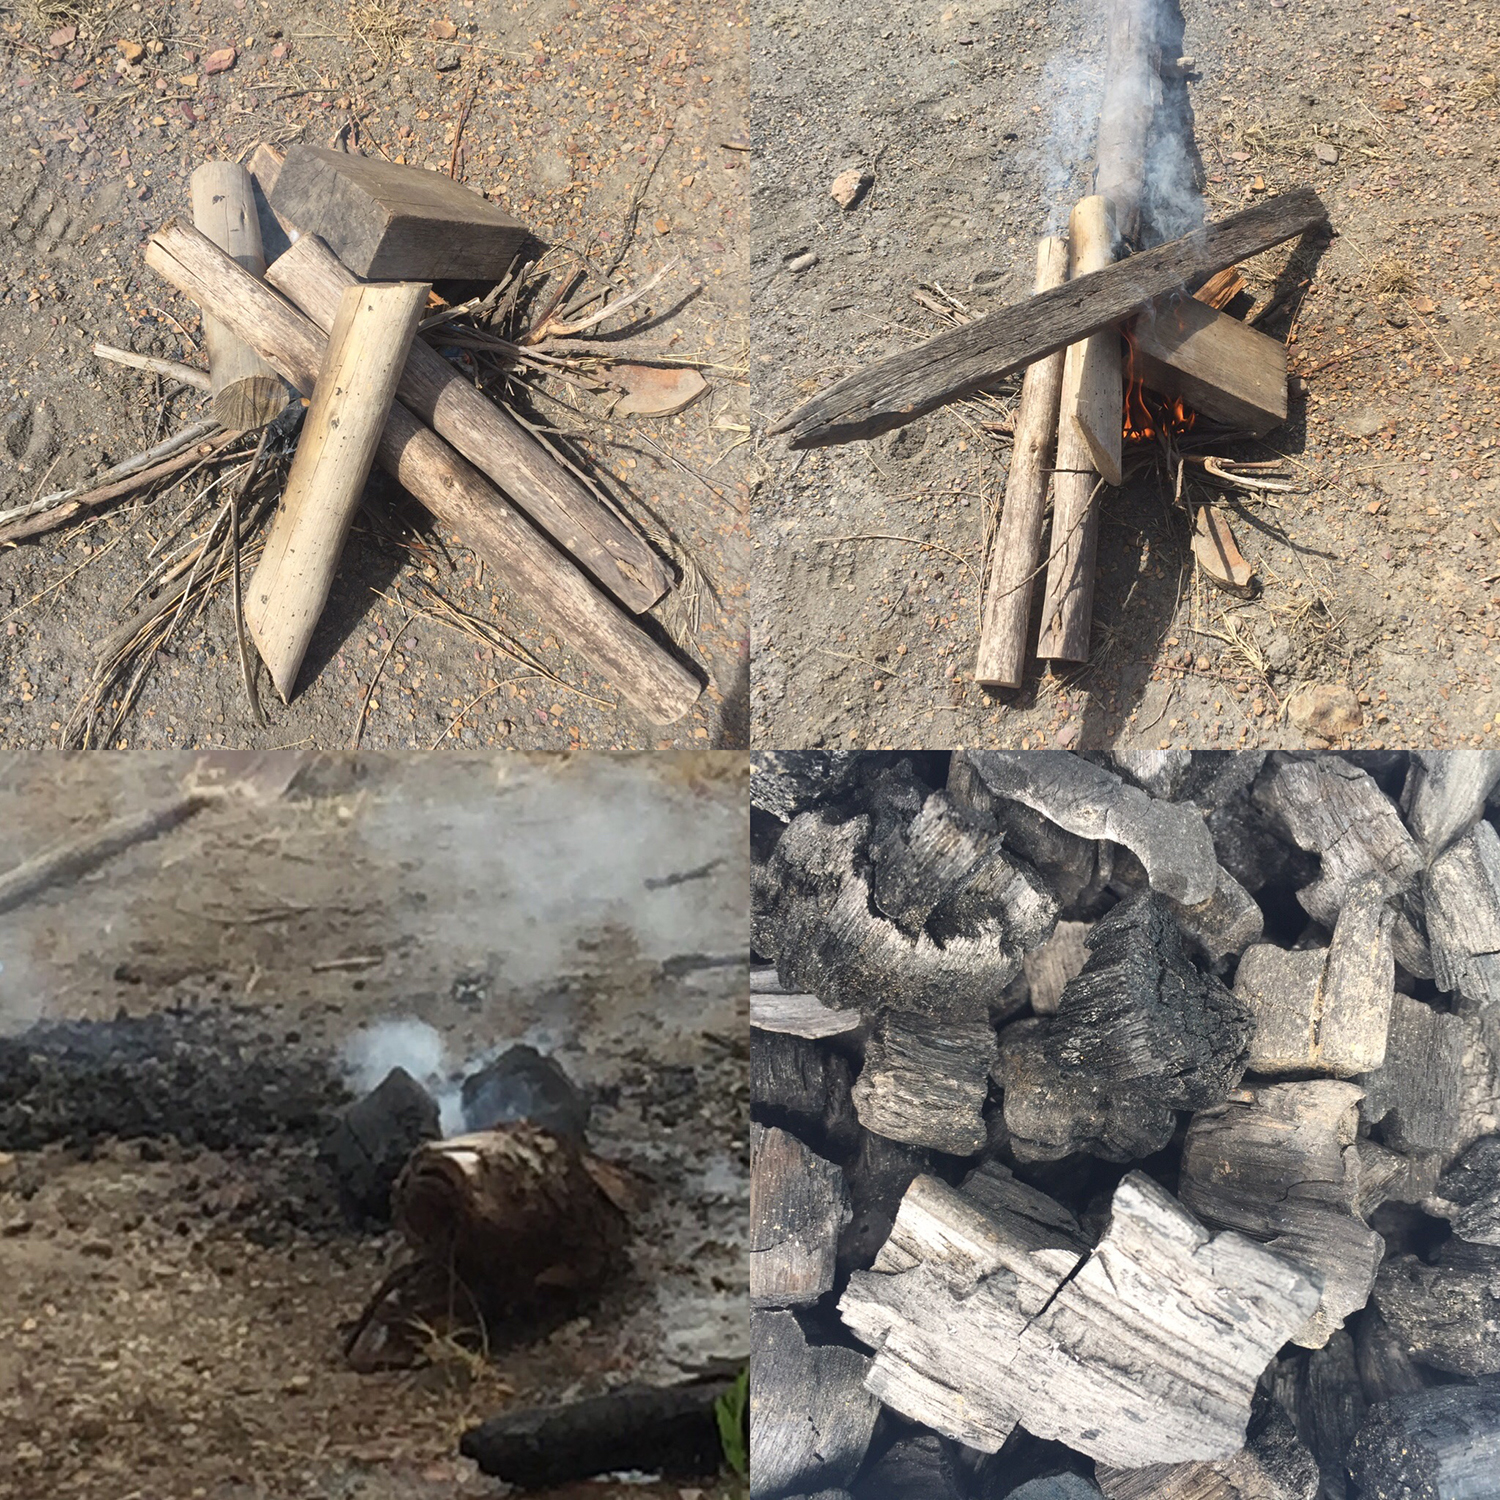 Making charcoal with different woods